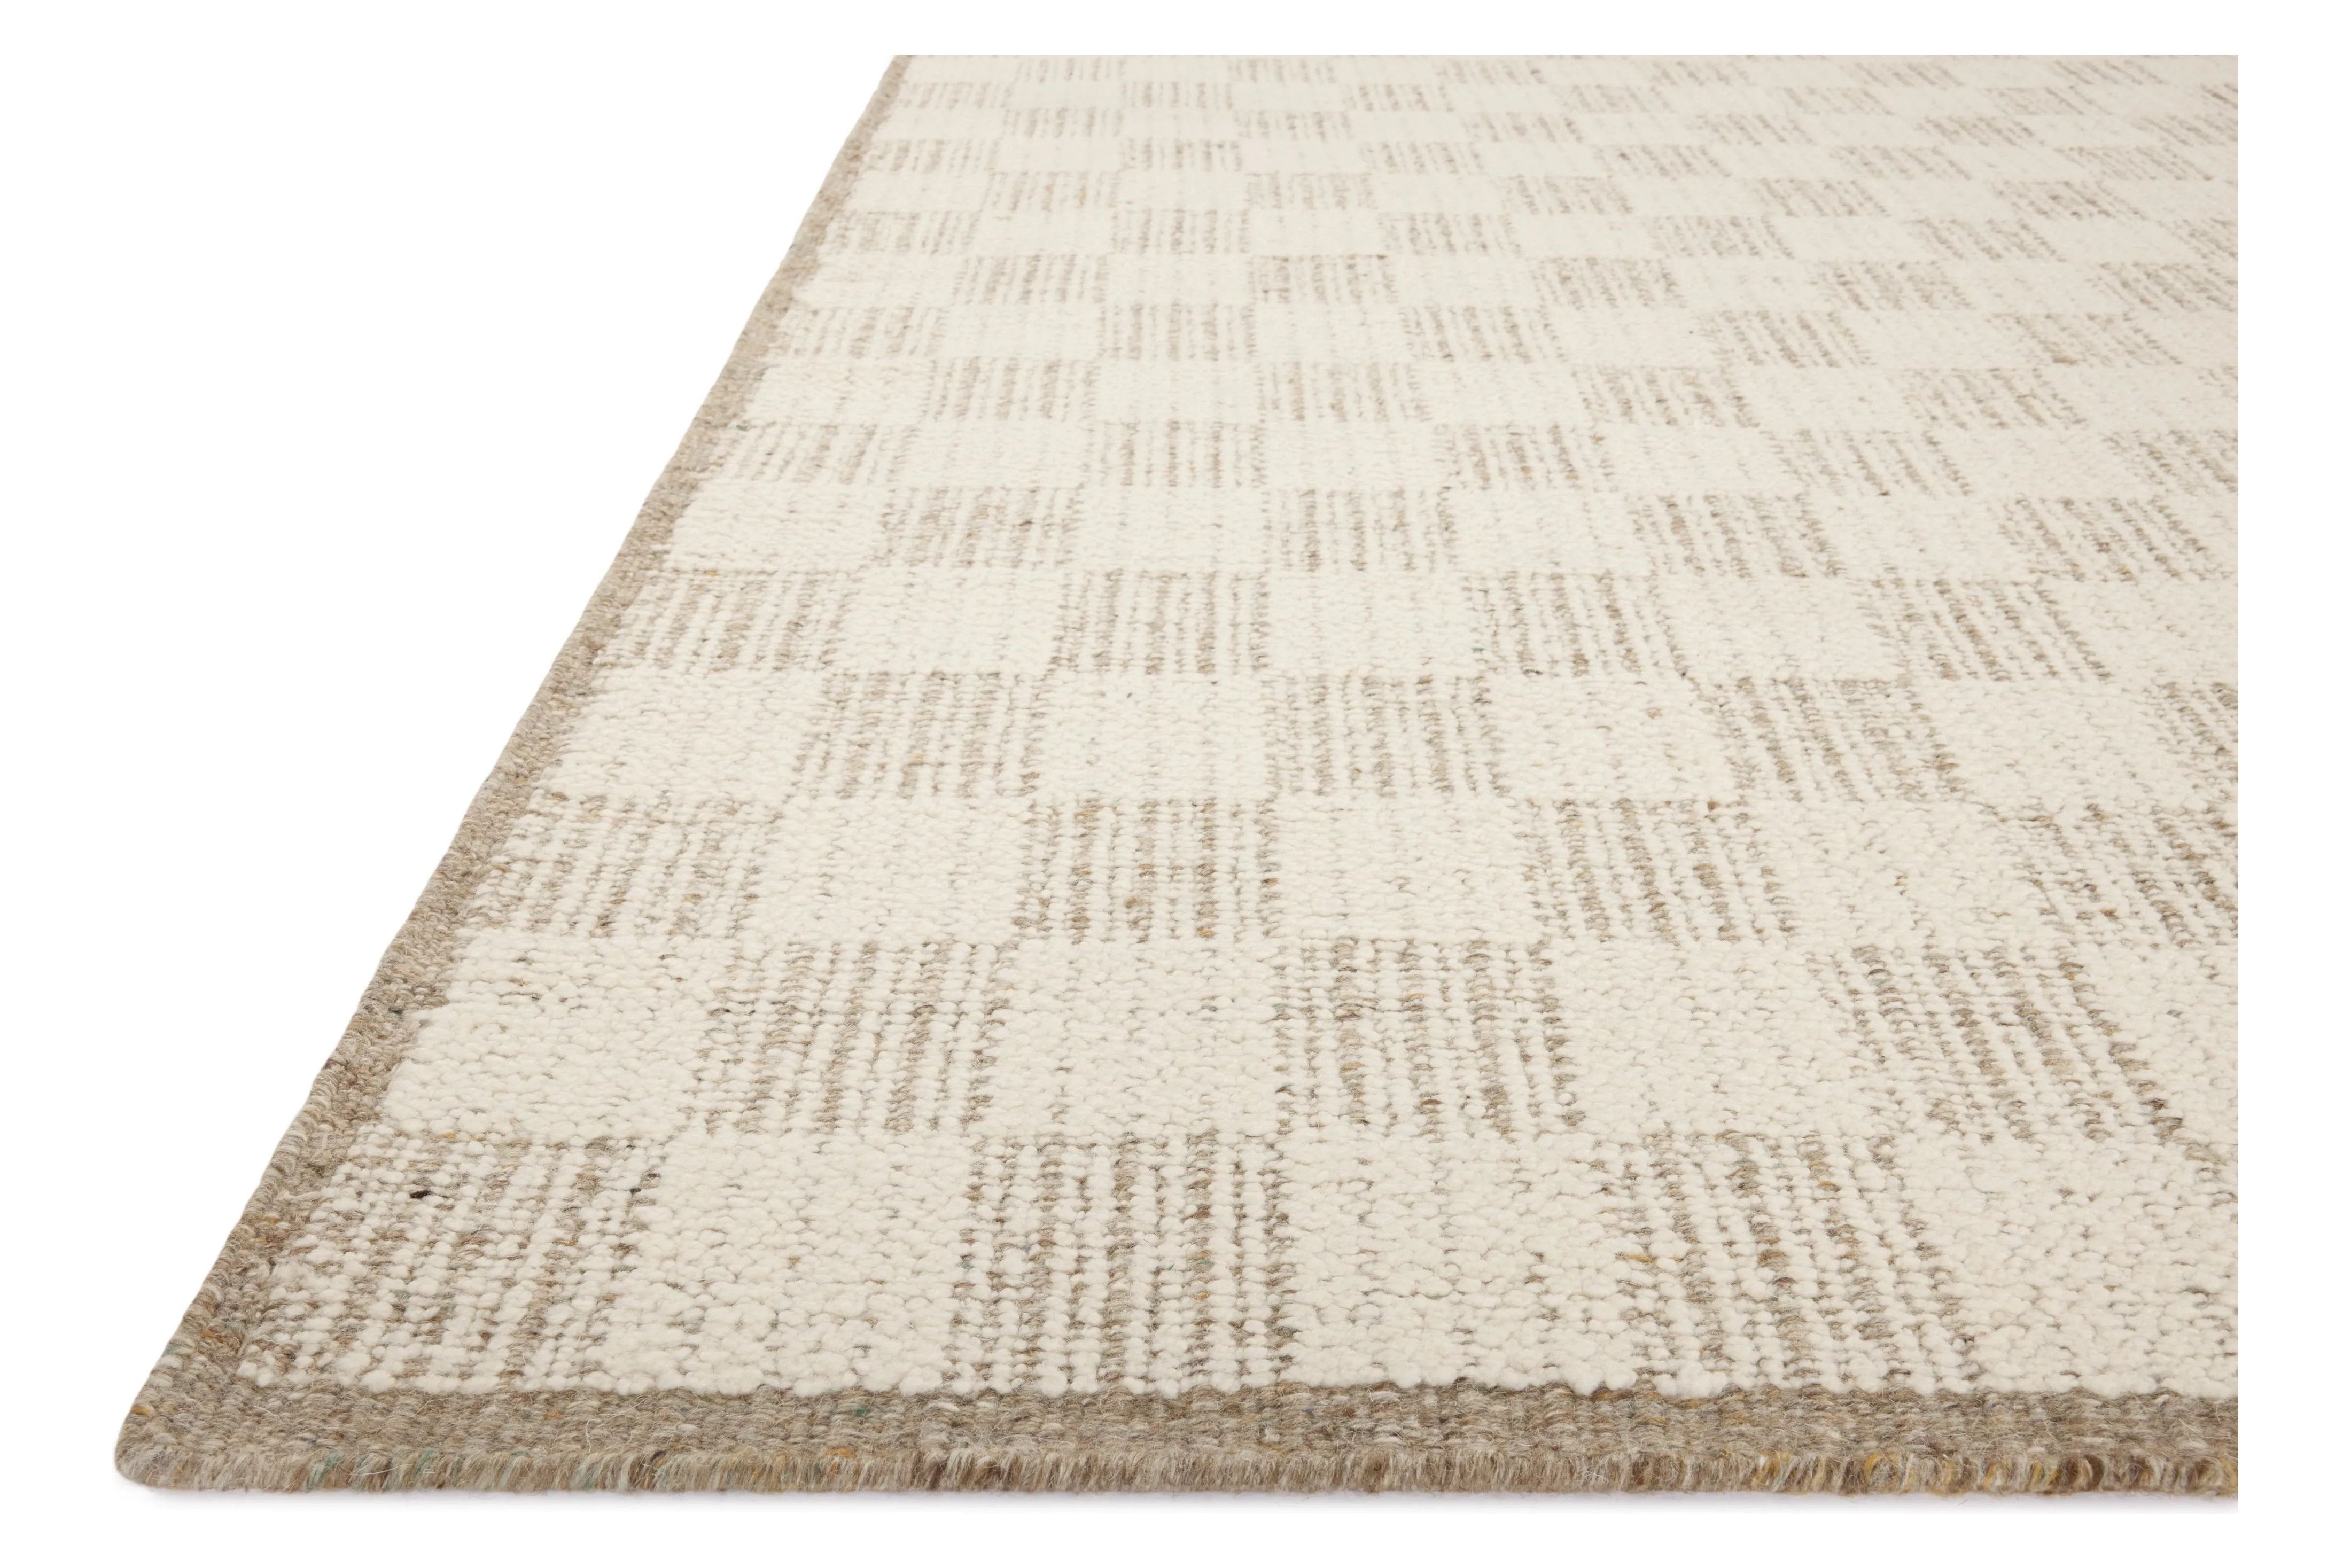 The Knox Ivory / Khaki Rug by Brigette Romanek x Loloi is a handwoven area rug with a contemporary checkerboard pattern and a texture reminiscent of a luxurious knit sweater. Made of a blend of wool and cotton that plays with scale and texture, Knox is imbued with cozy luxury that can anchor any room. Amethyst Home provides interior design, new home construction design consulting, vintage area rugs, and lighting in the Miami metro area.